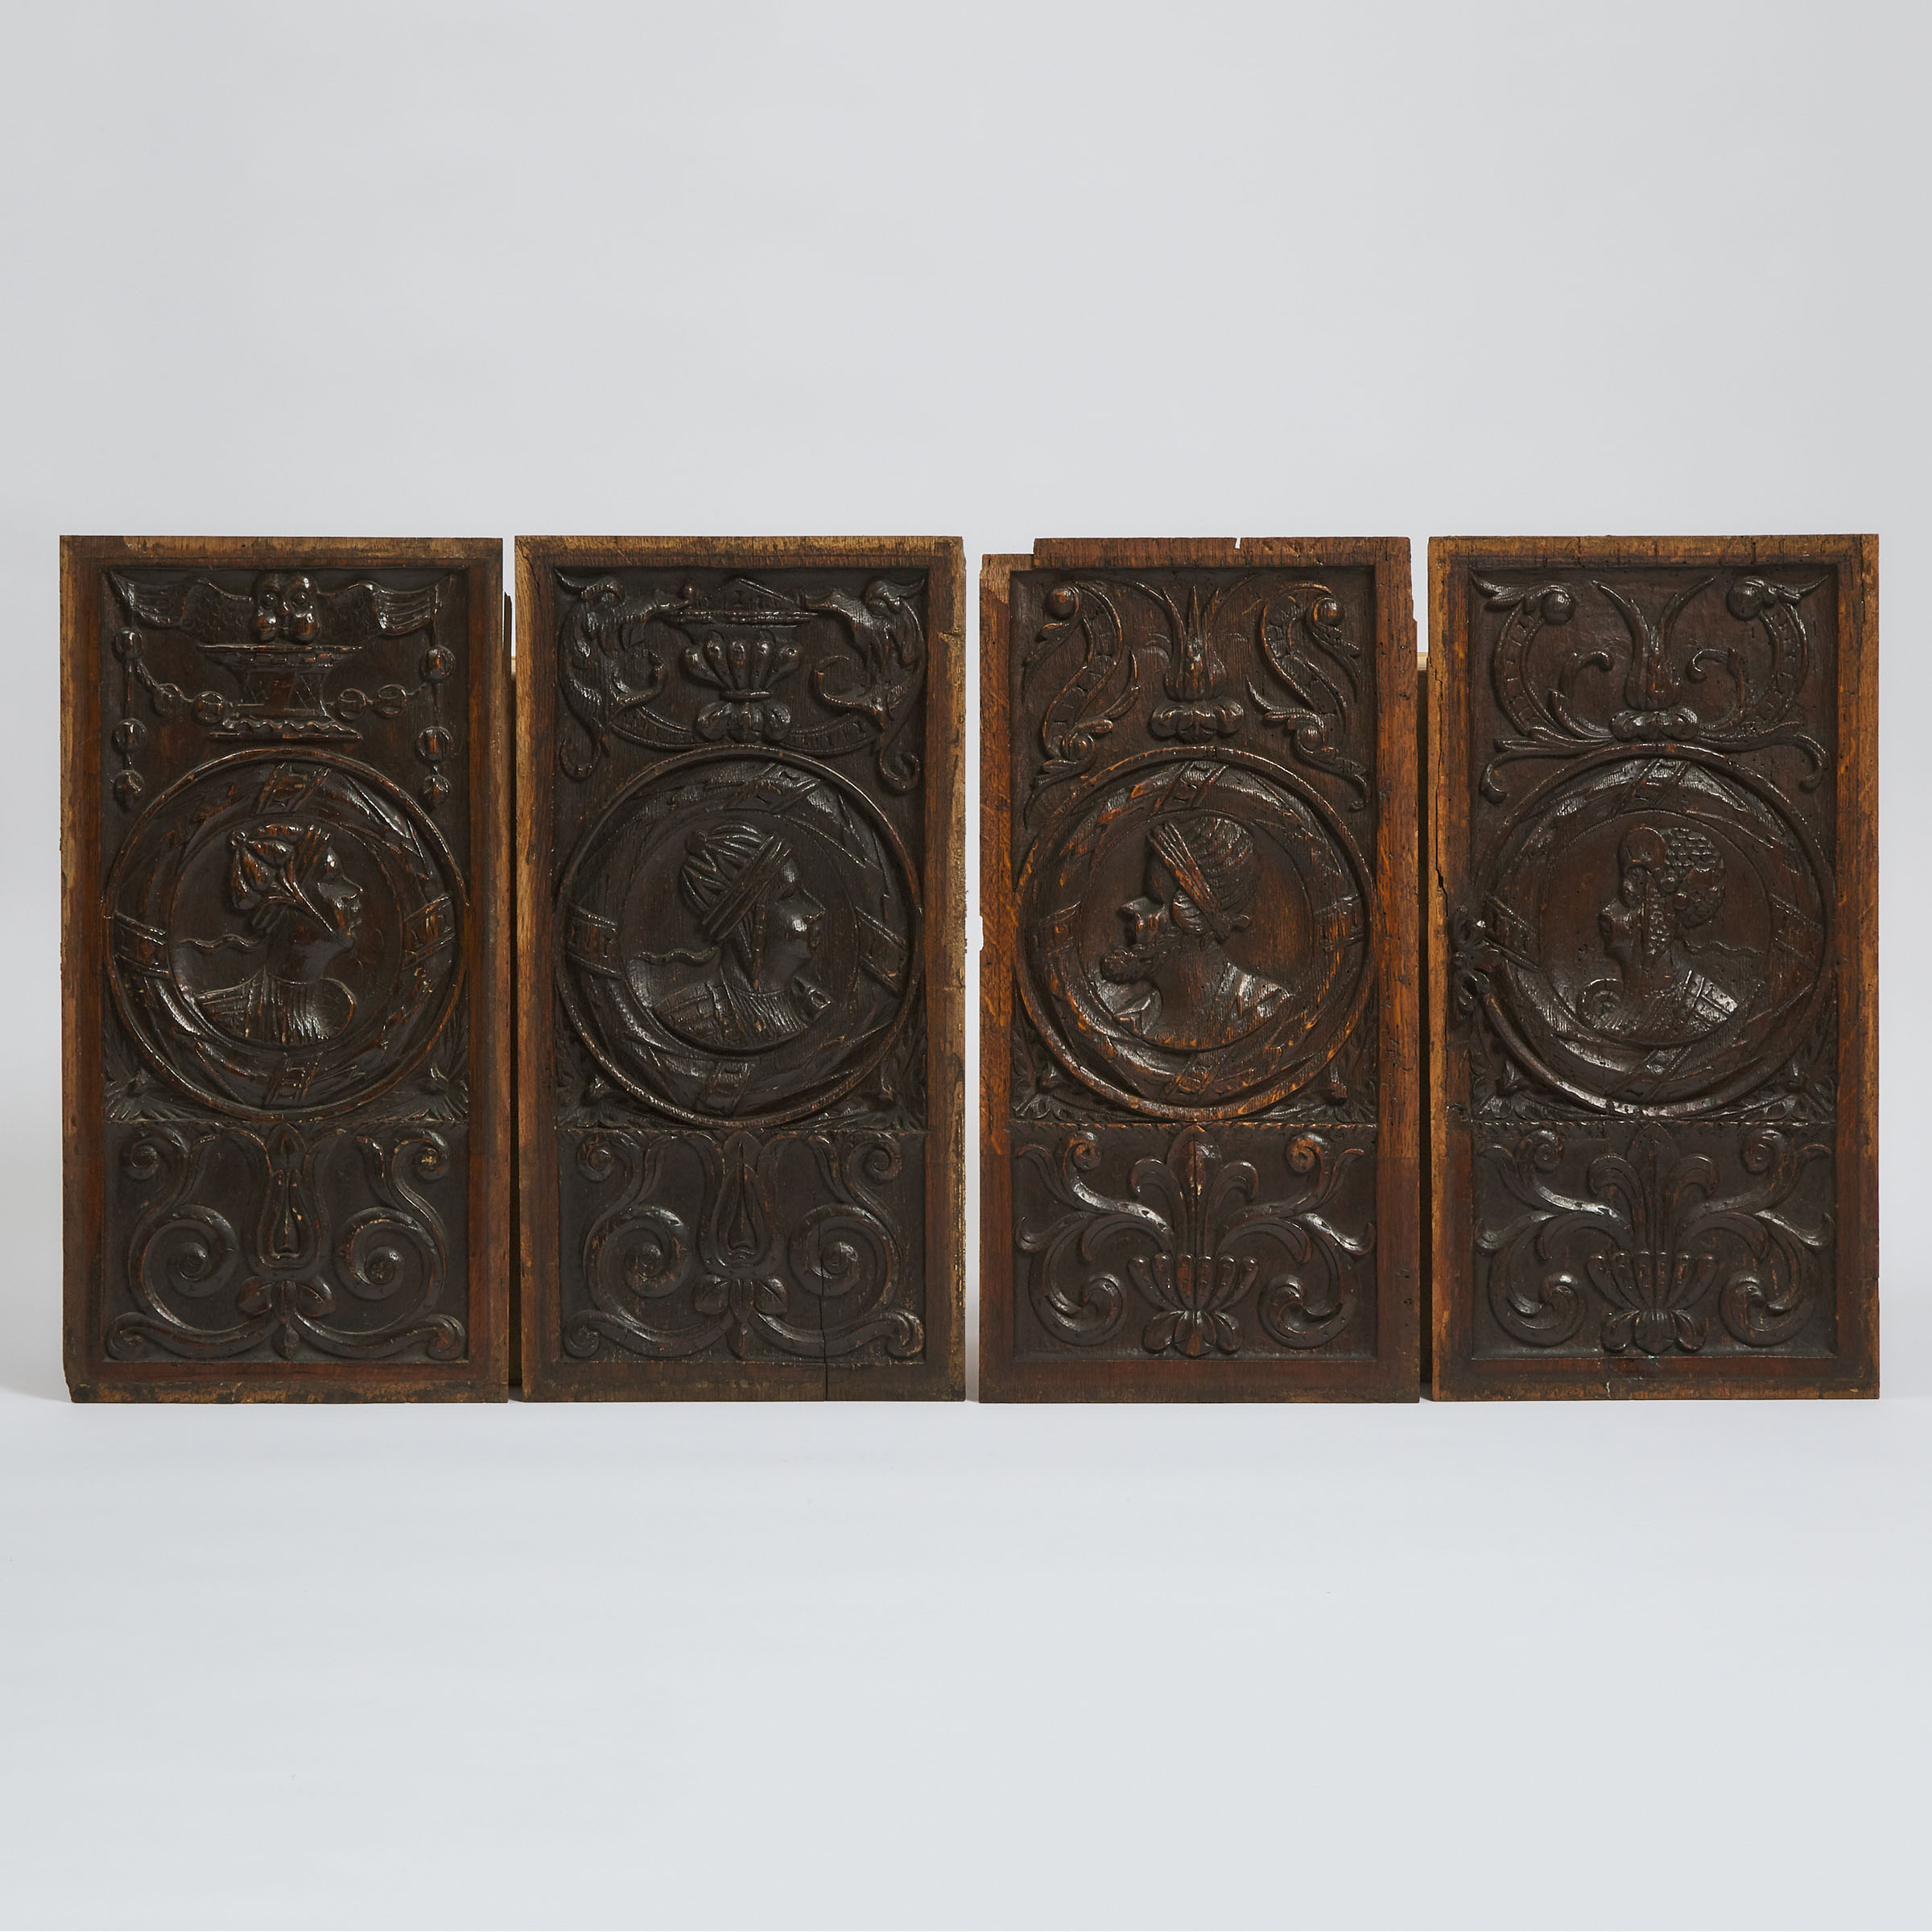 Matched Set of Four English Relief